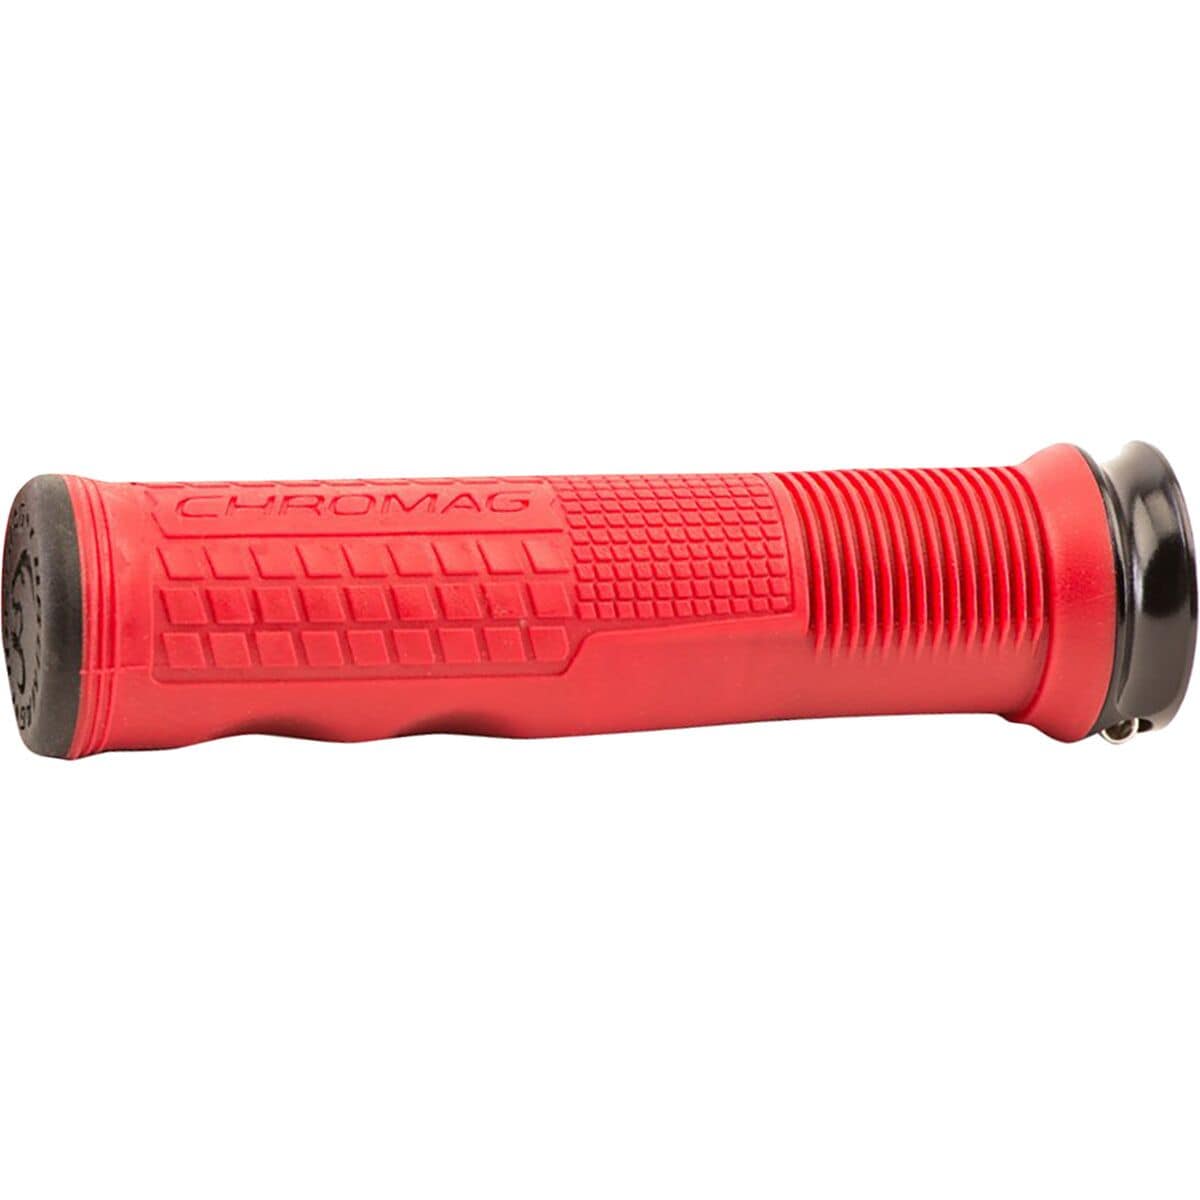 Chromag Format Grips Red, Pair -  170-007-002